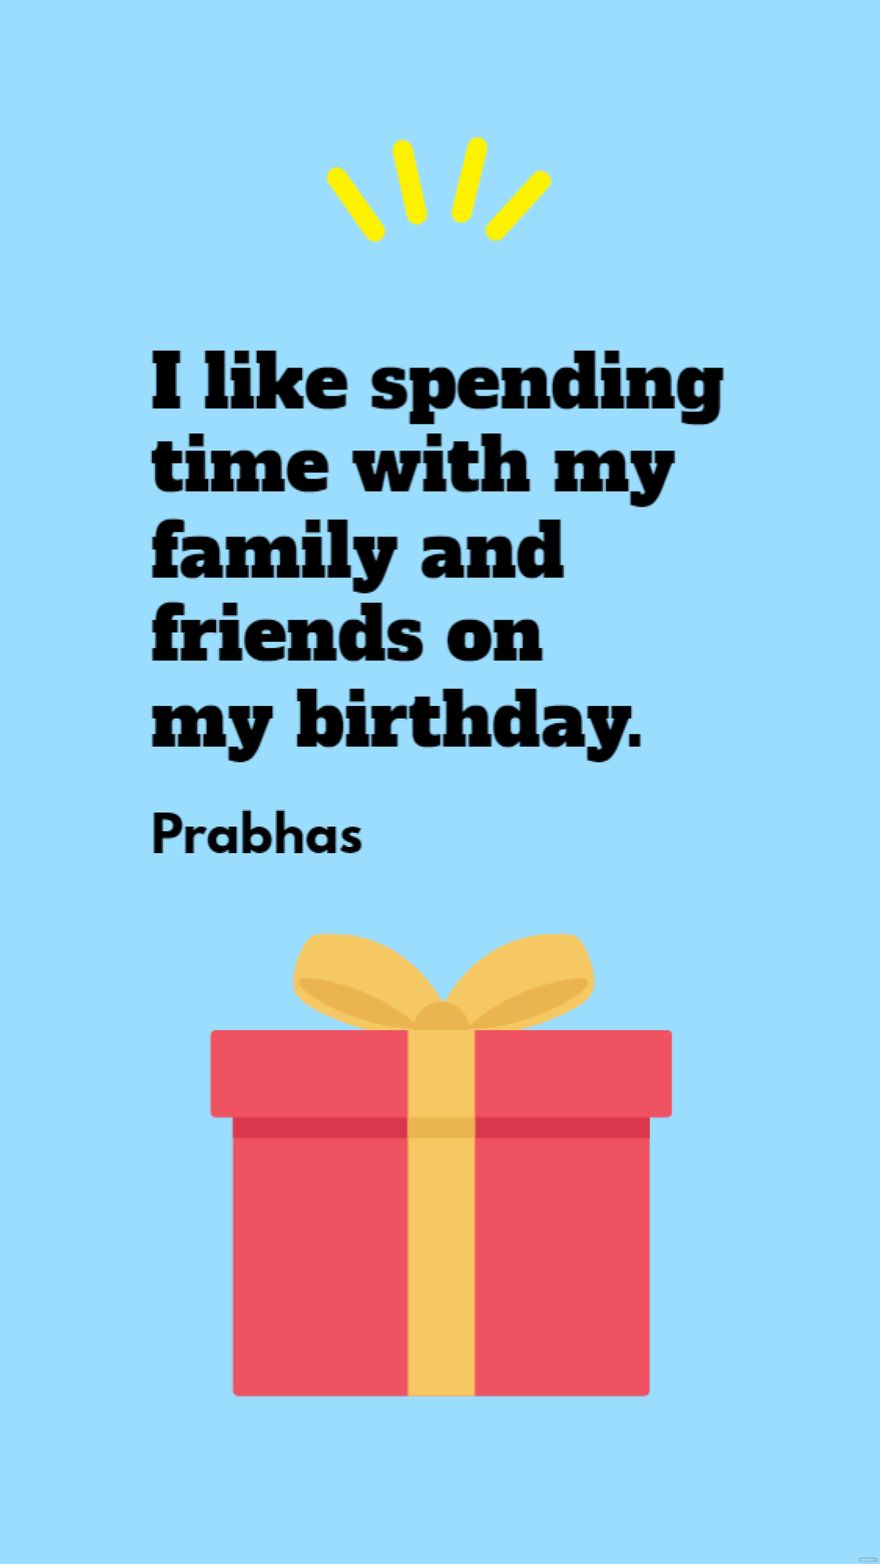 Free Prabhas - I like spending time with my family and friends on my birthday.